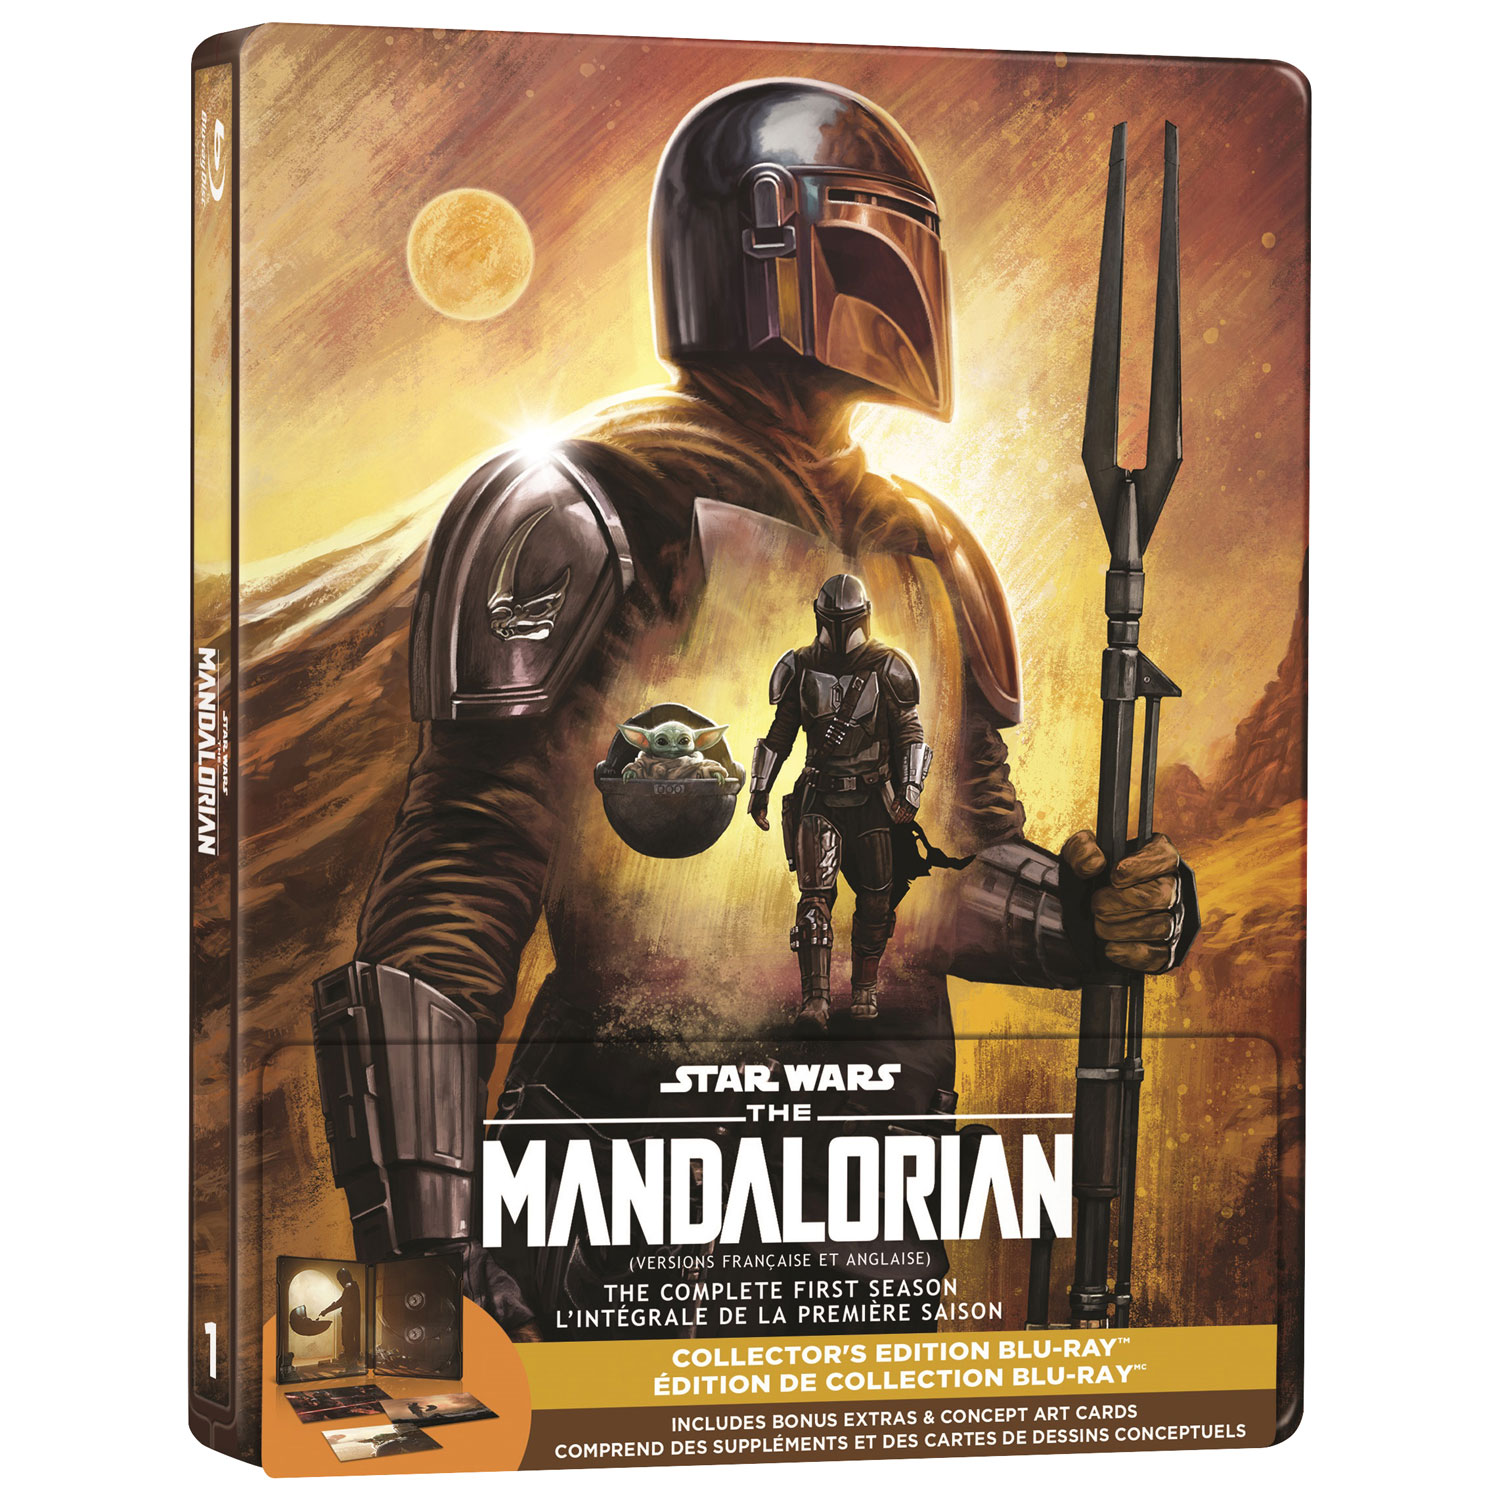 The Mandalorian: The Complete First Season (Collector's Edition) (Blu-ray)